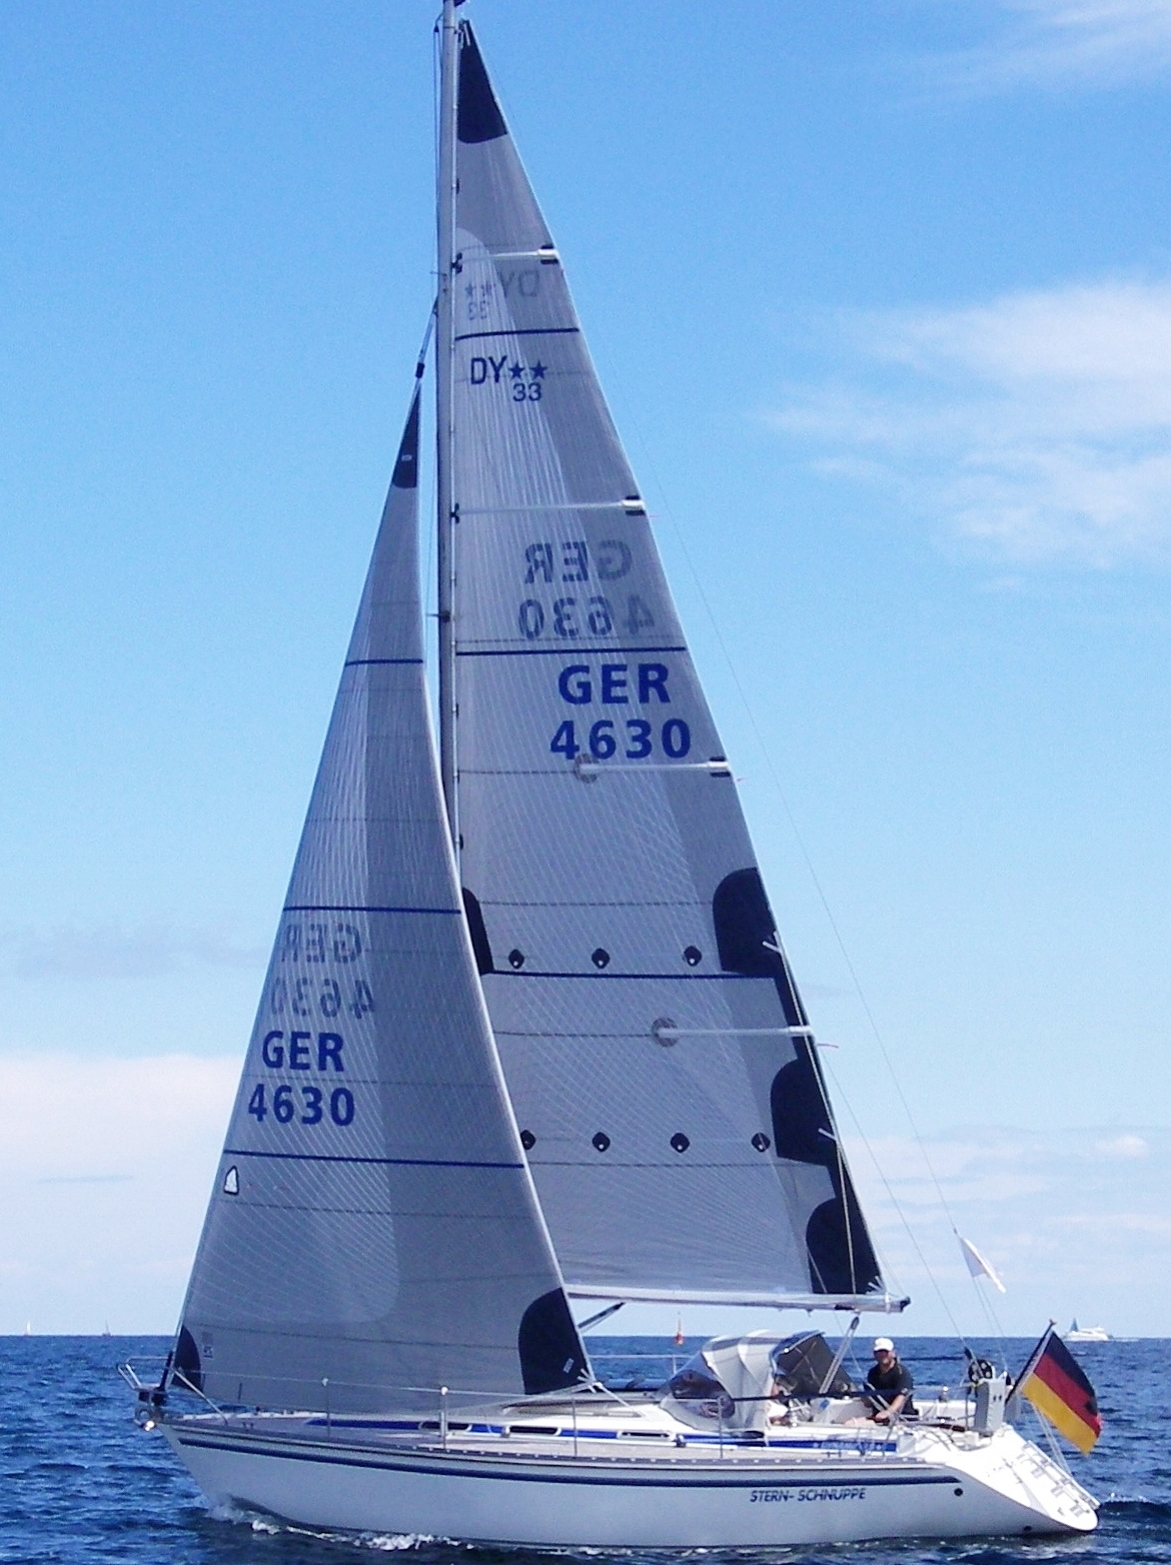 The genoa shown above has taffeta on the part of the sail overlapping the mast to protect the tapes and the sail's mylar layer. This boat's mainsail also has a partial taffeta layer up the whole leech.